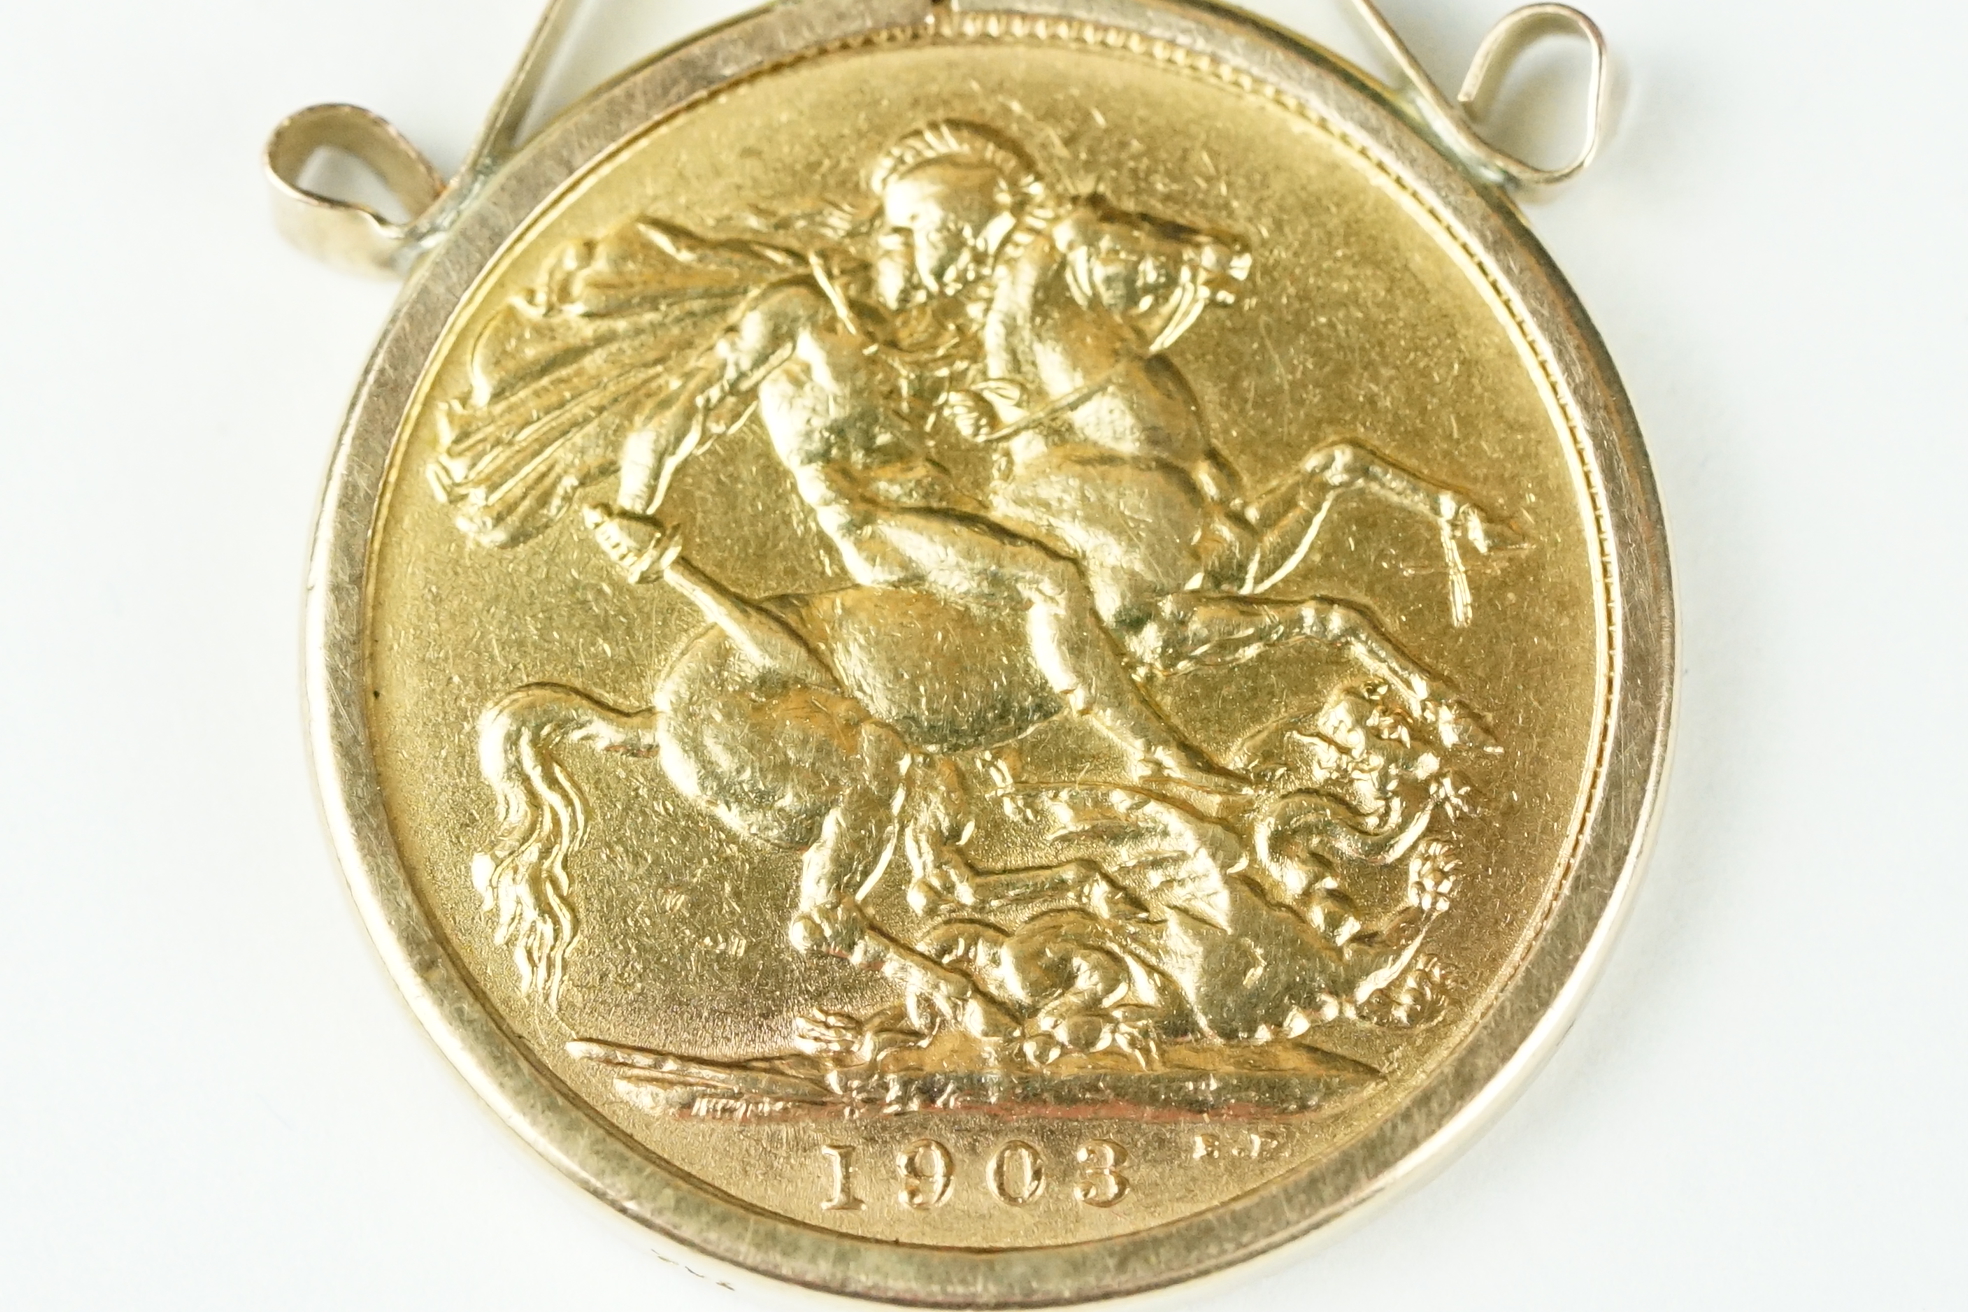 A British King Edward VII 1903 gold full sovereign coin mounted within a 9ct gold mount. - Image 2 of 8